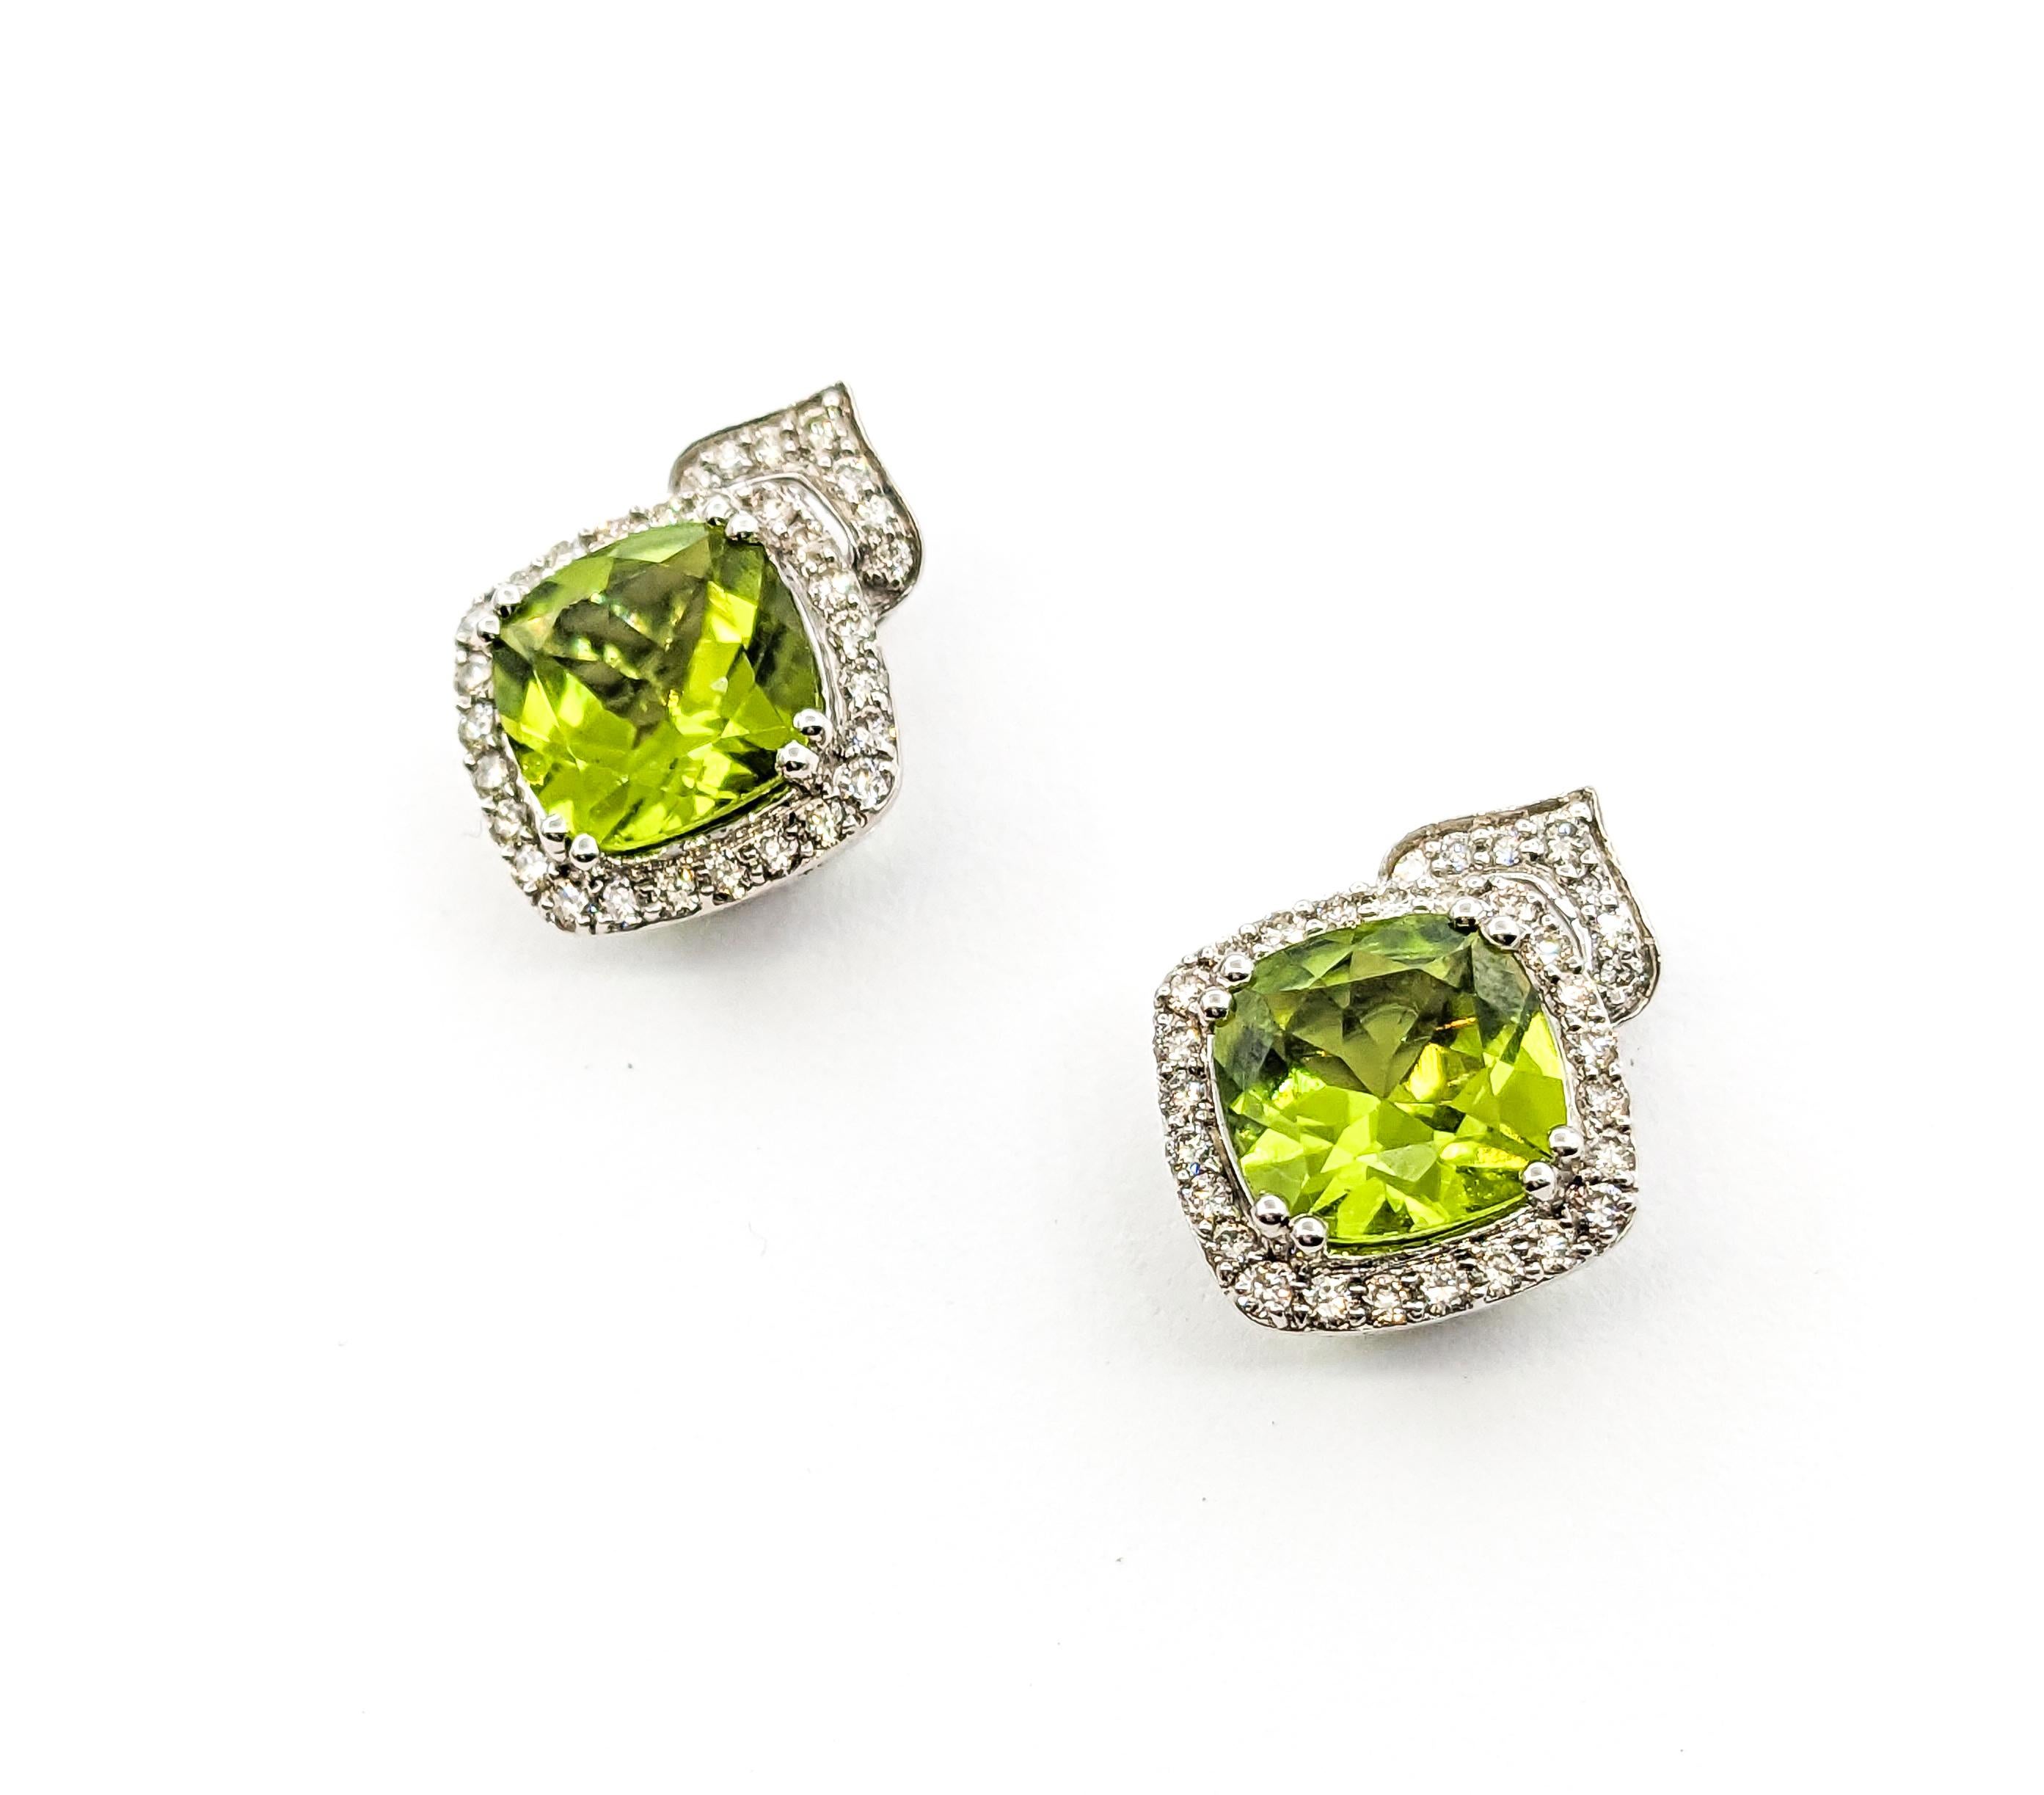 4.25ctw Peridot & Diamond Stud earrings In White Gold

These exquisite earrings, designed in 10kt white gold, boast a stunning combination of 0.50ctw diamonds and 4.25ctw peridot stones in a stud design. The diamonds, with their SI clarity and near